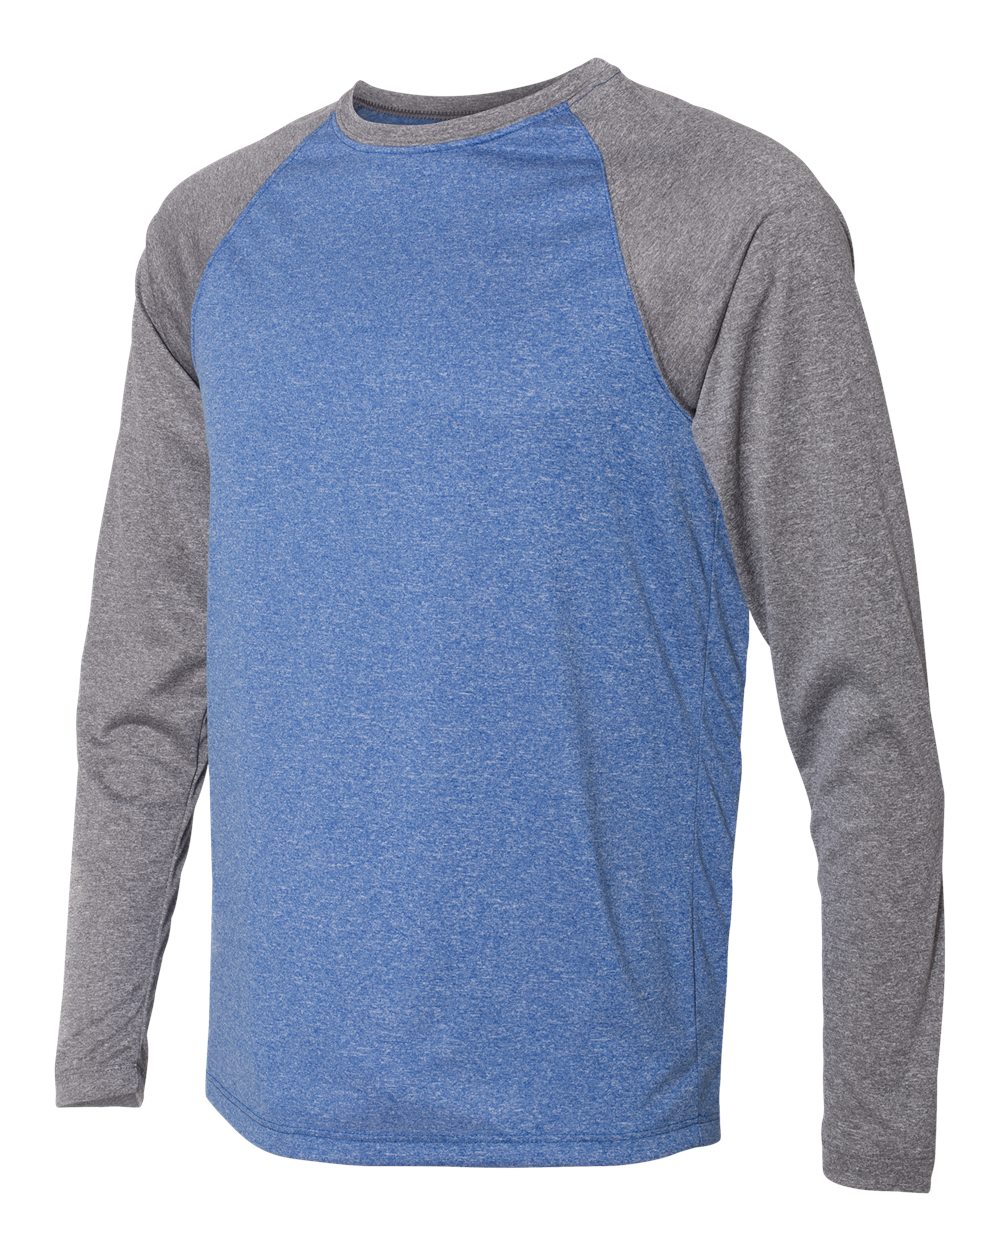 click to view Navy Heather/ Graphite